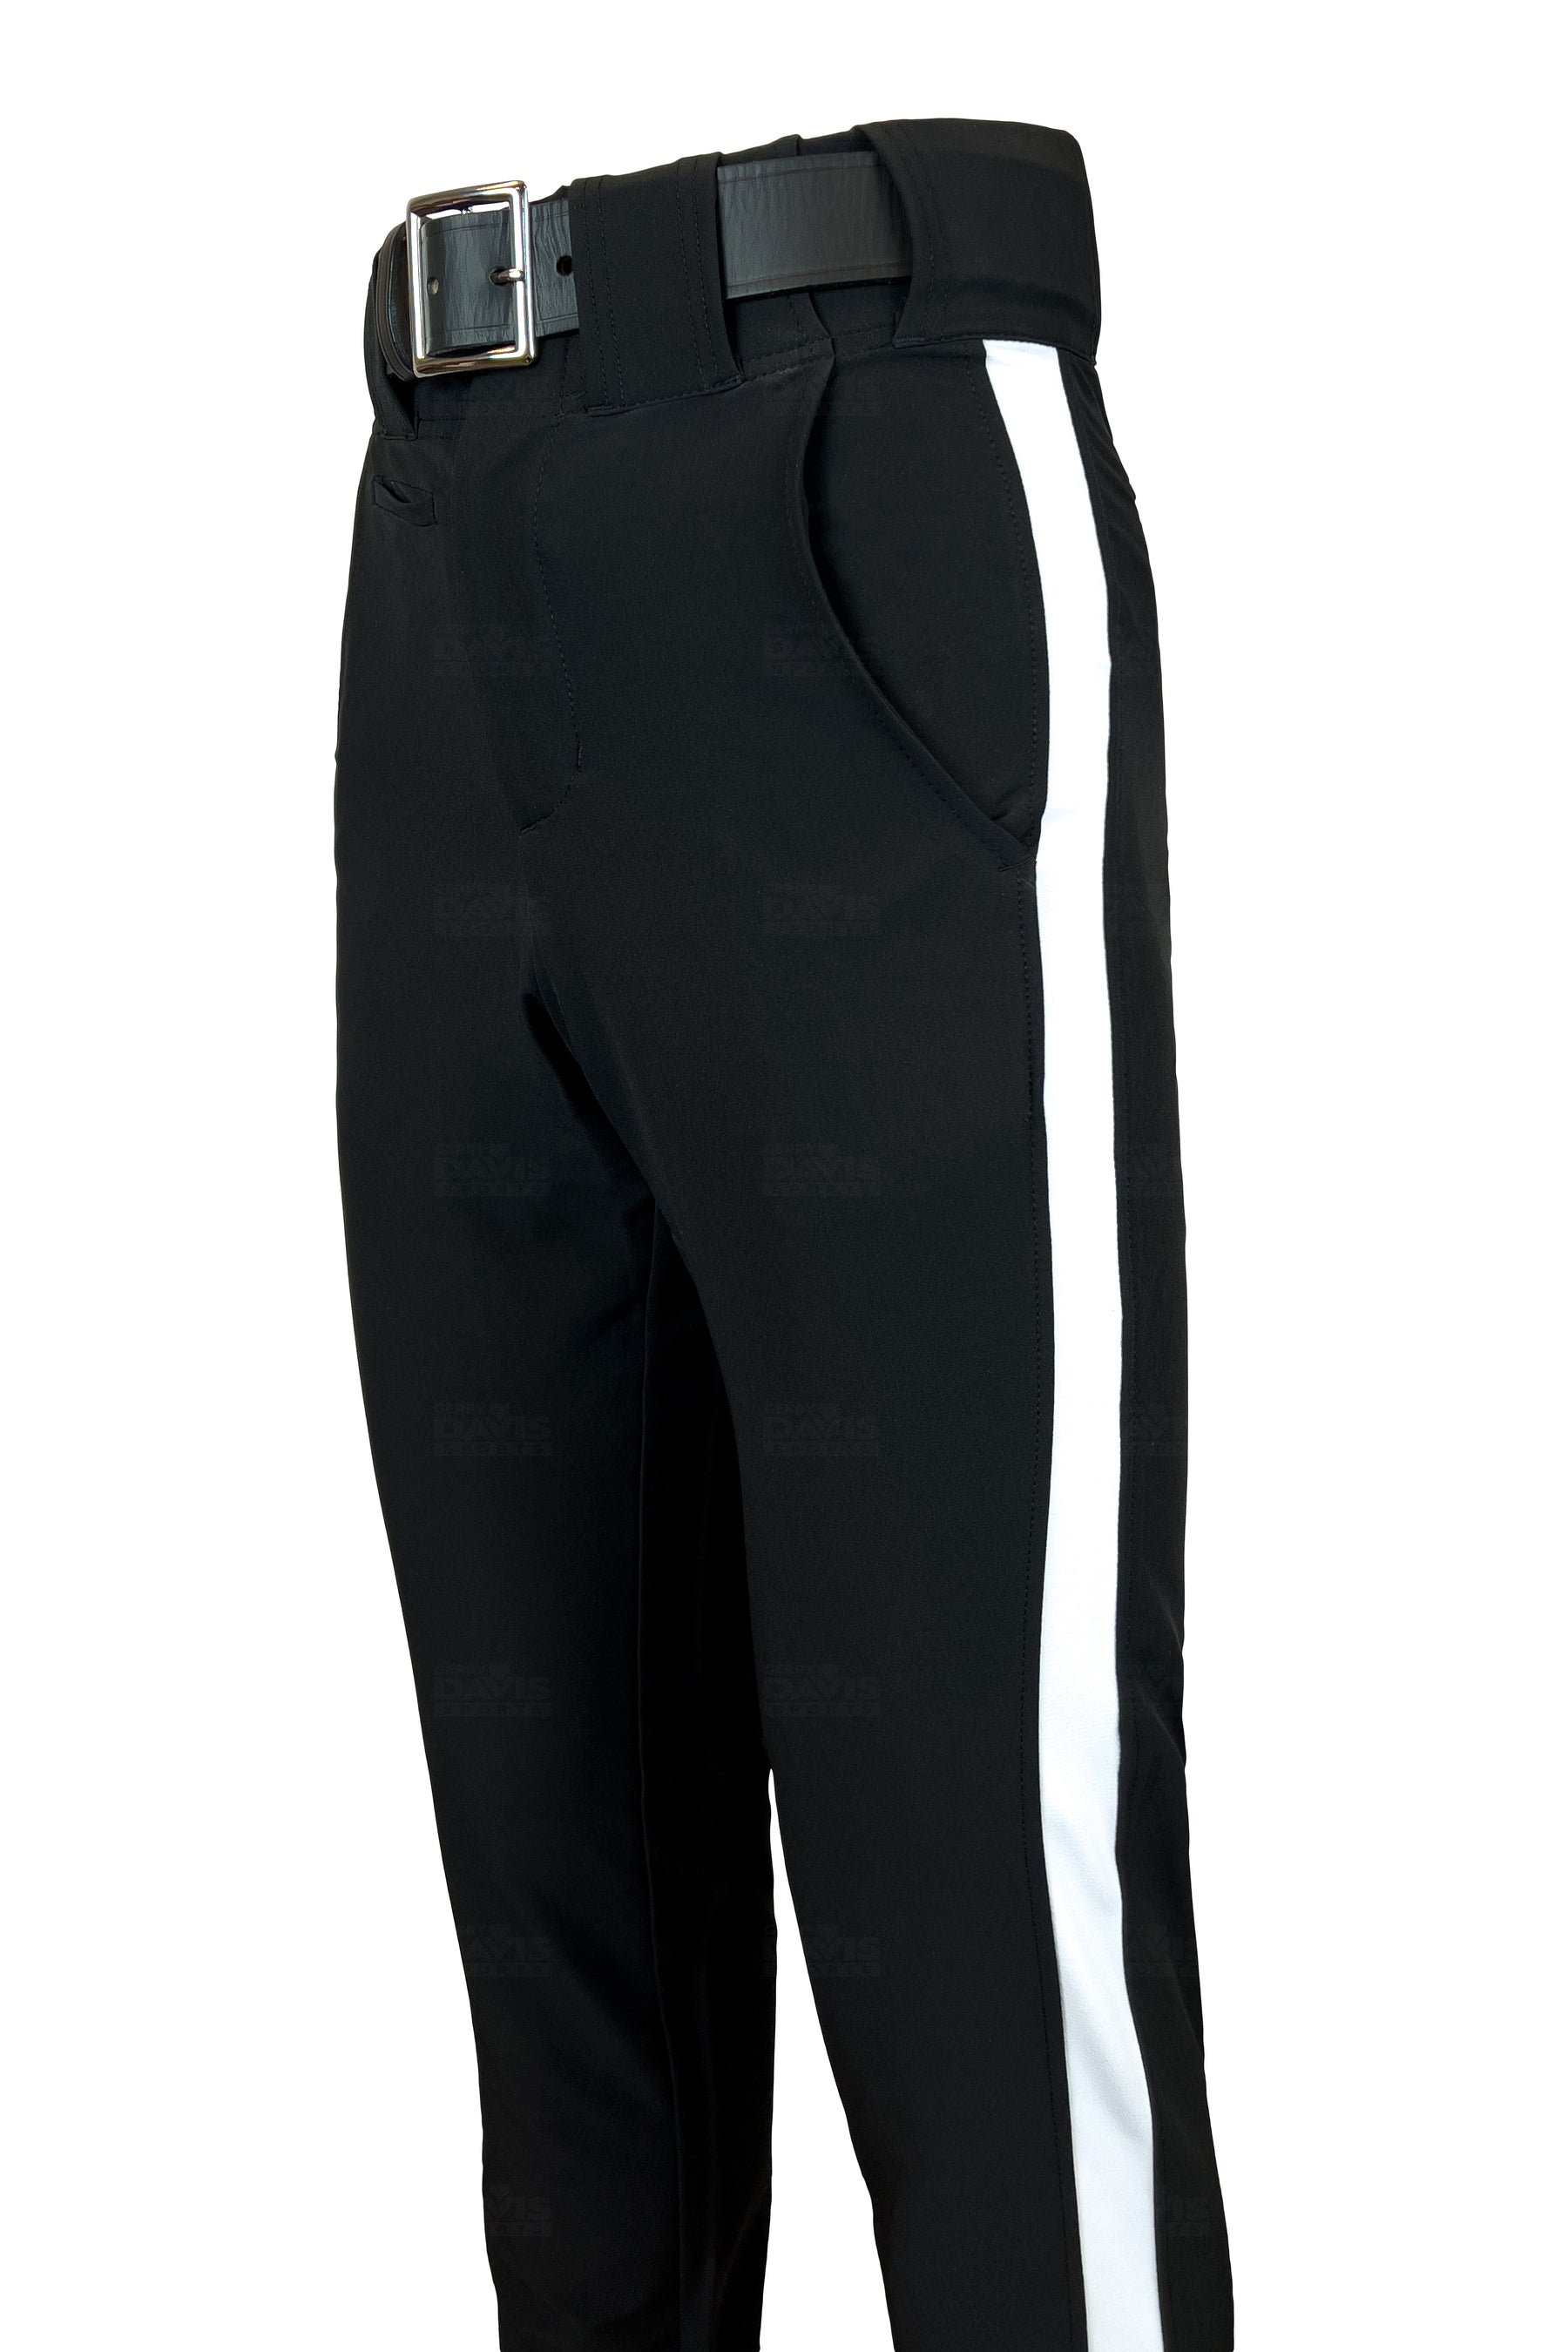 Smitty, FBS-184, Tapered Fit Football Referee Pants